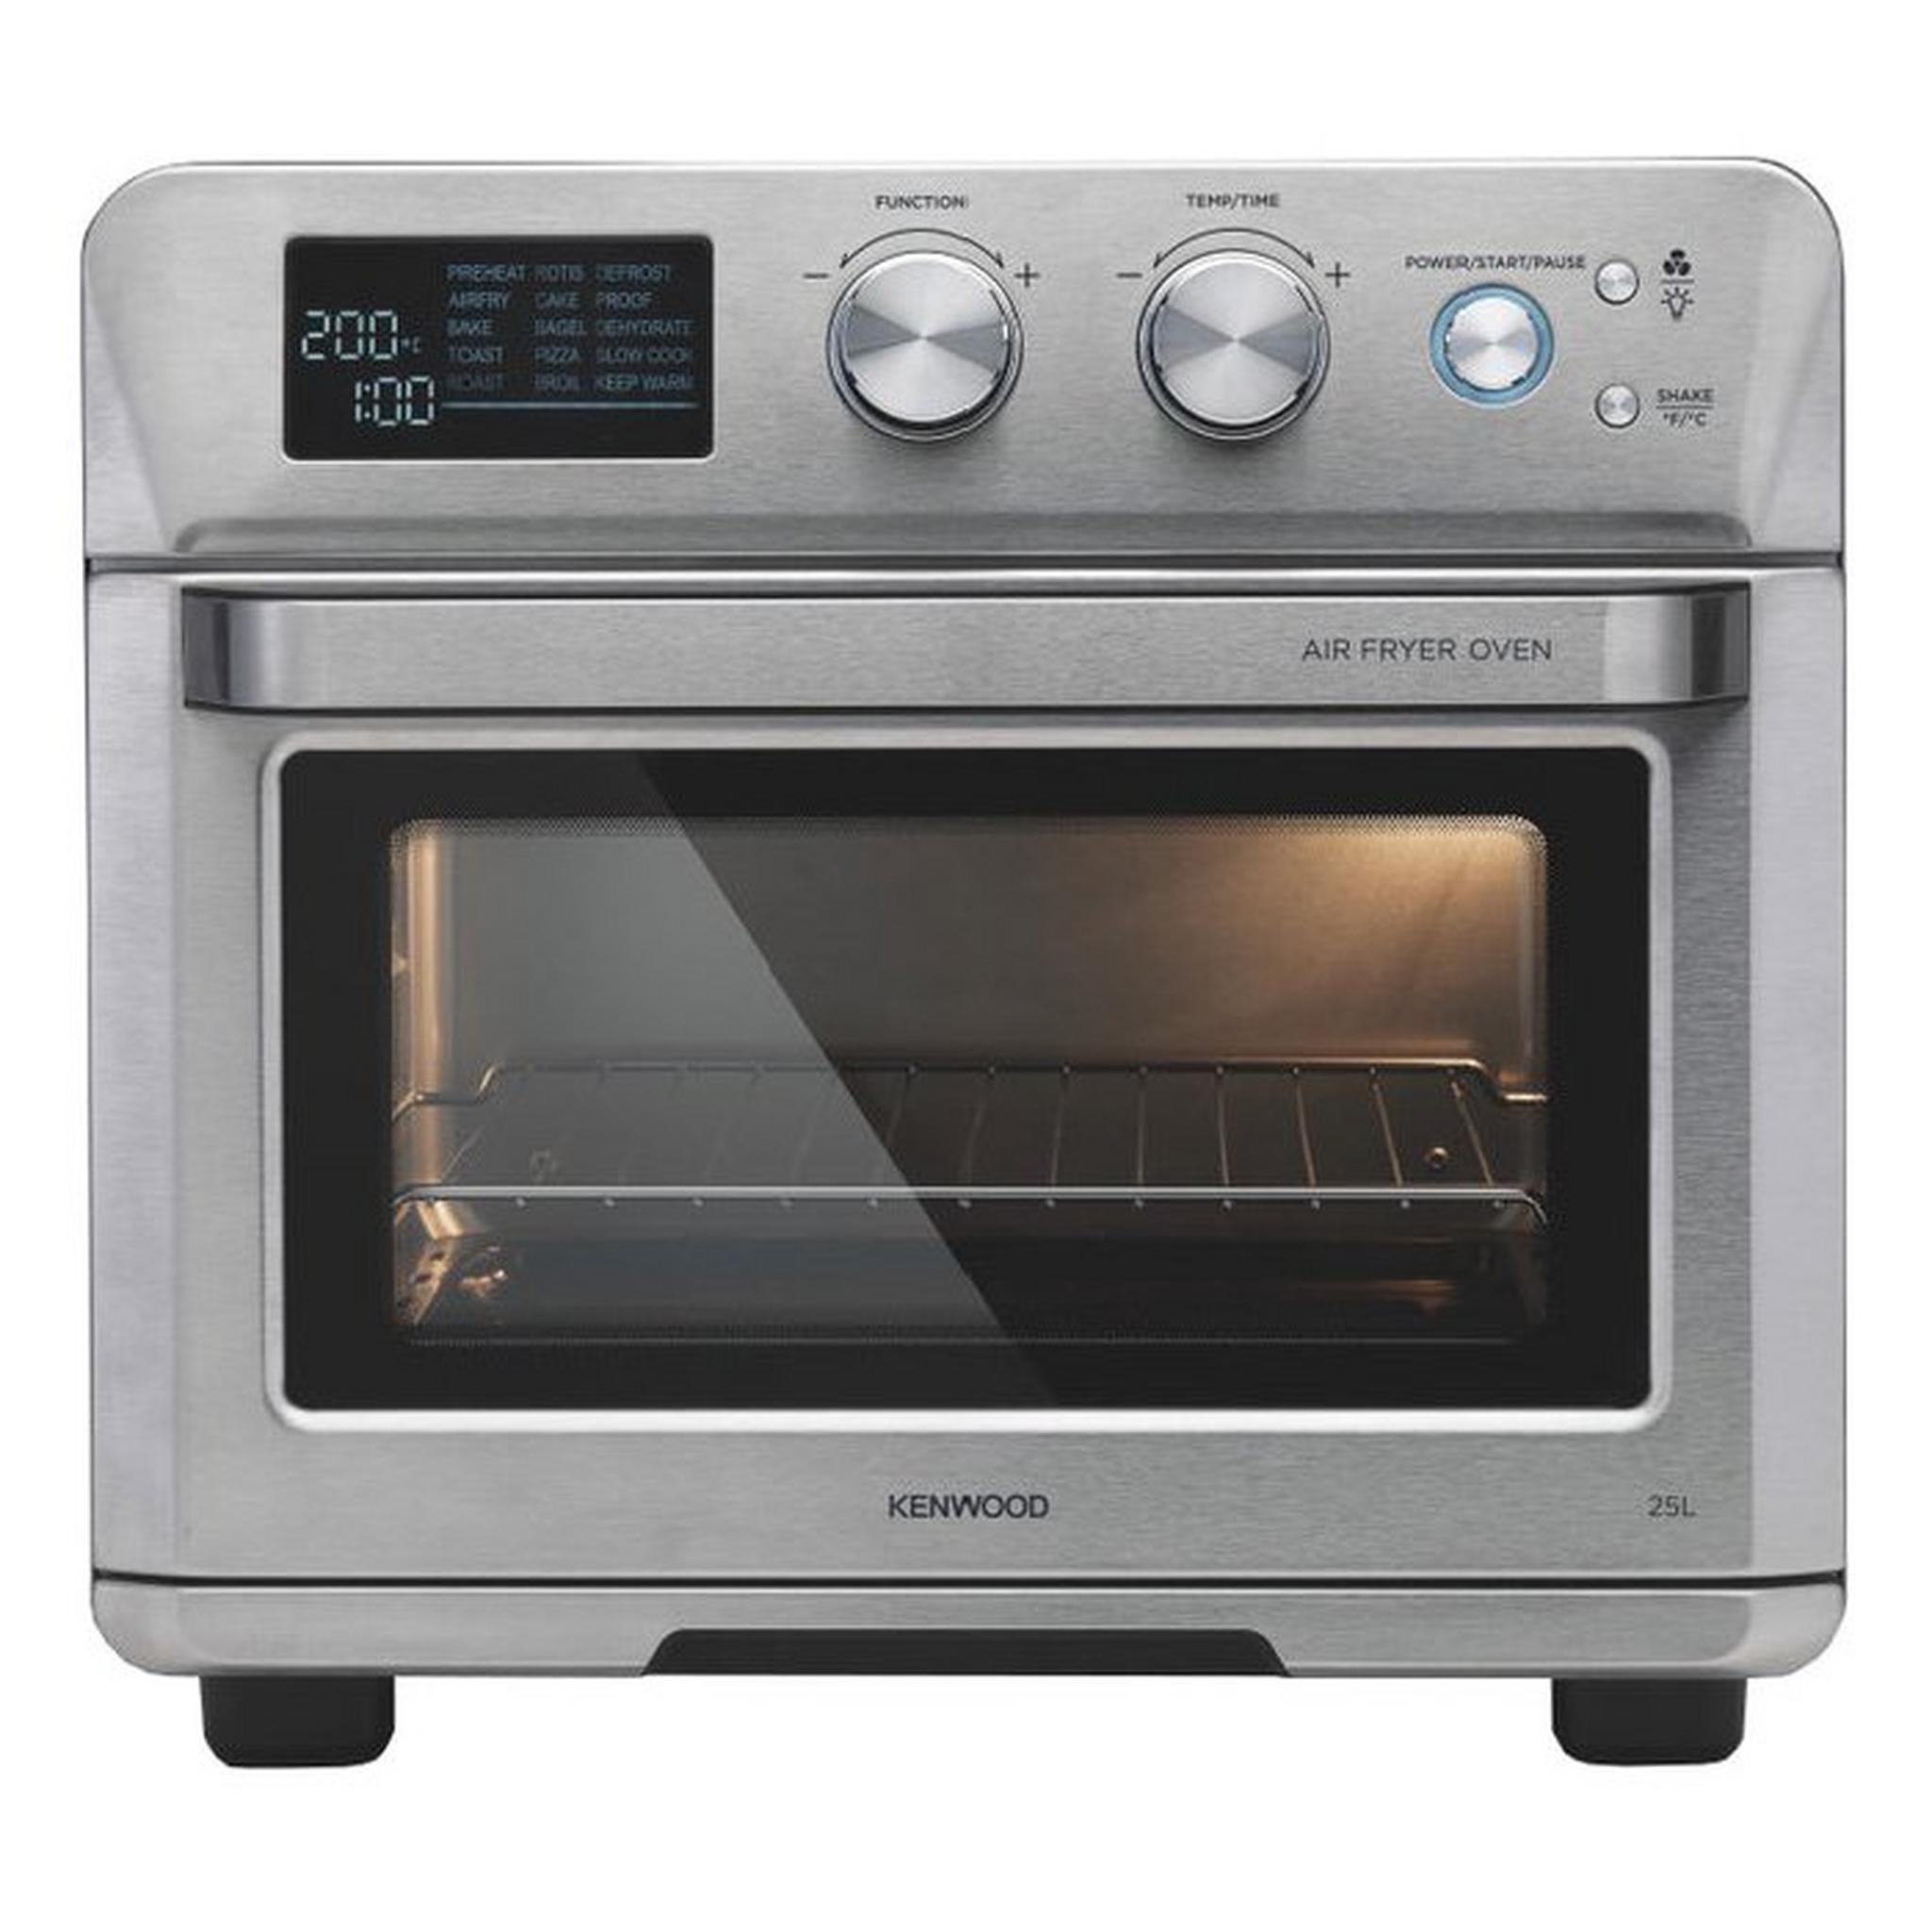 KENWOOD 2 in 1 Air Fryer Oven, 1700W, 25L, MOA26.600SS – Stainless steel